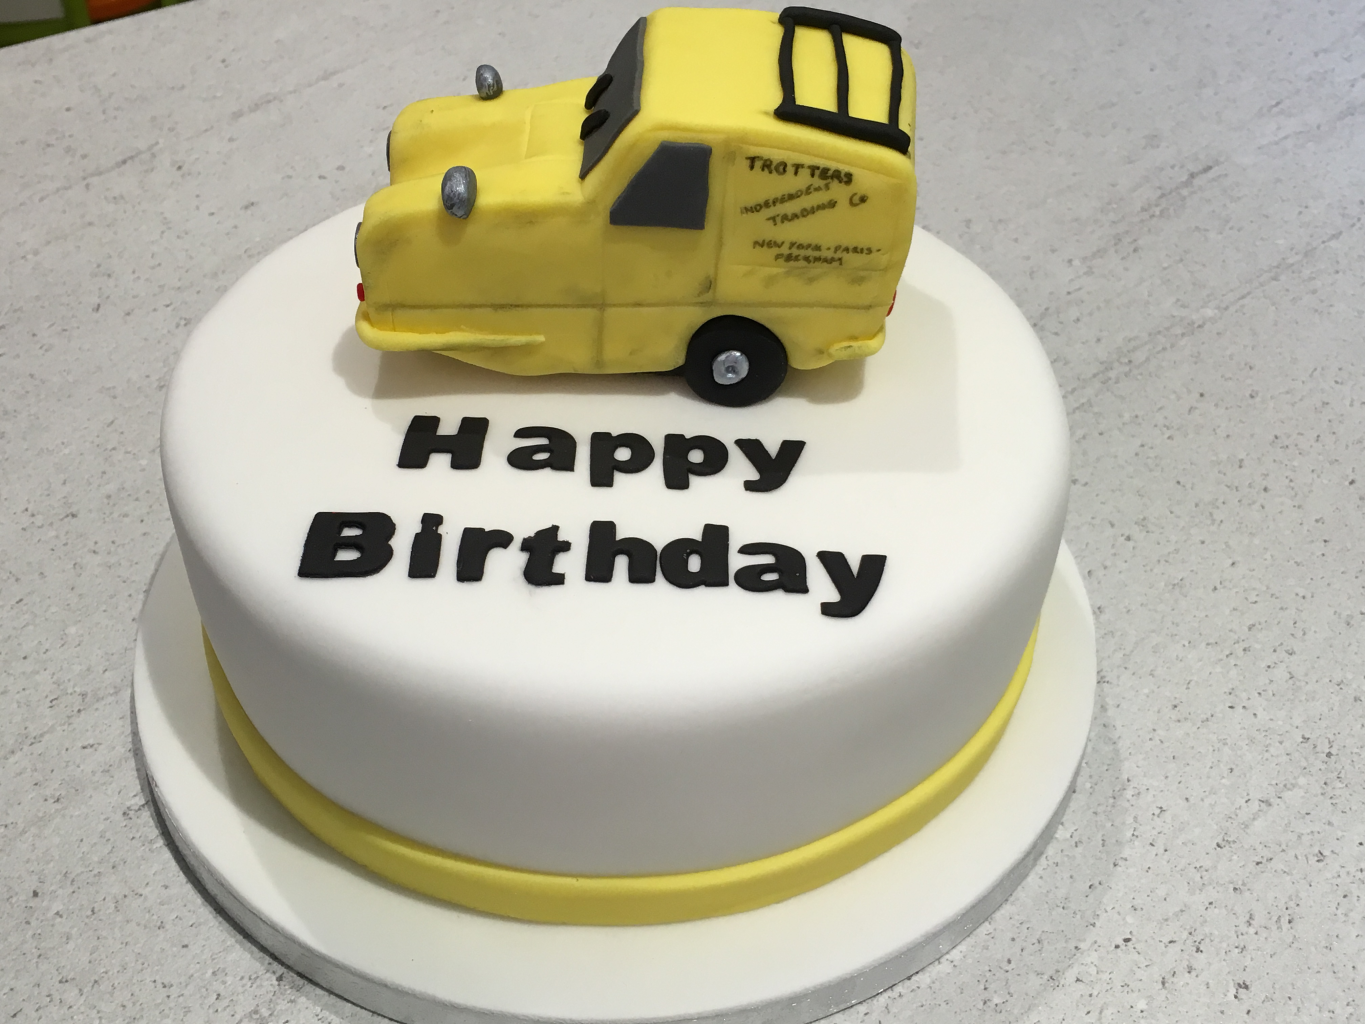 Only-Fools-and-Horses-van-cake